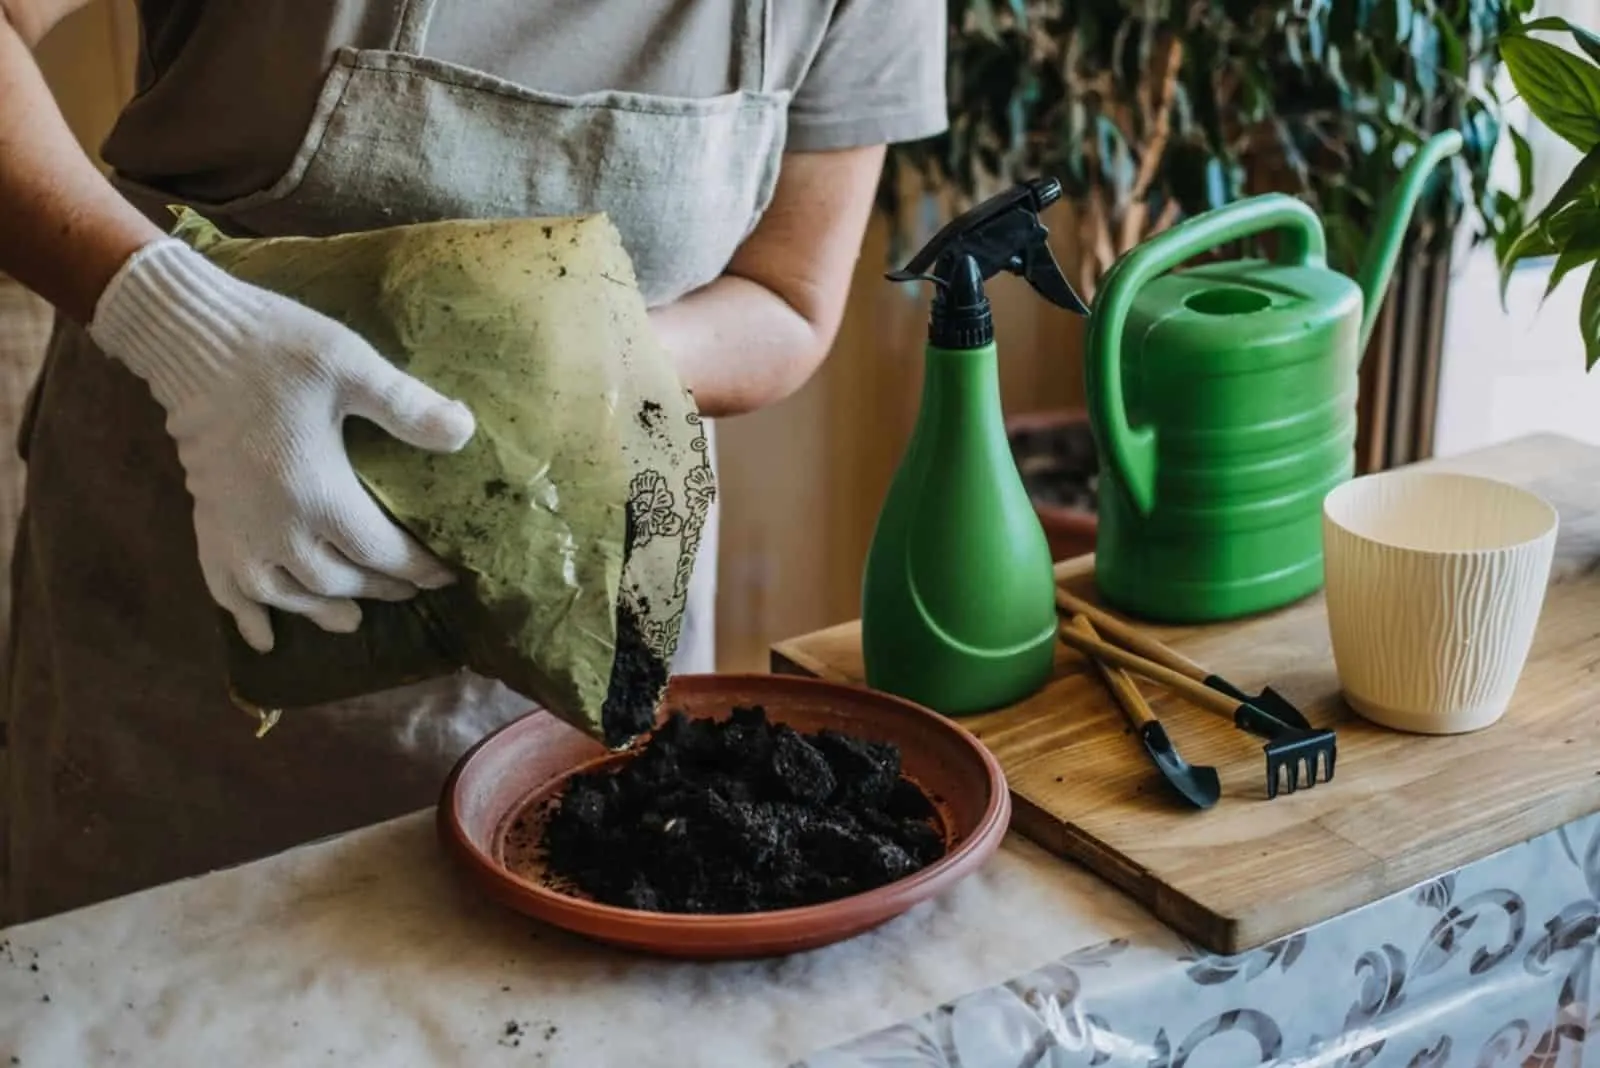 Woman is transplanting plant into new pot at home